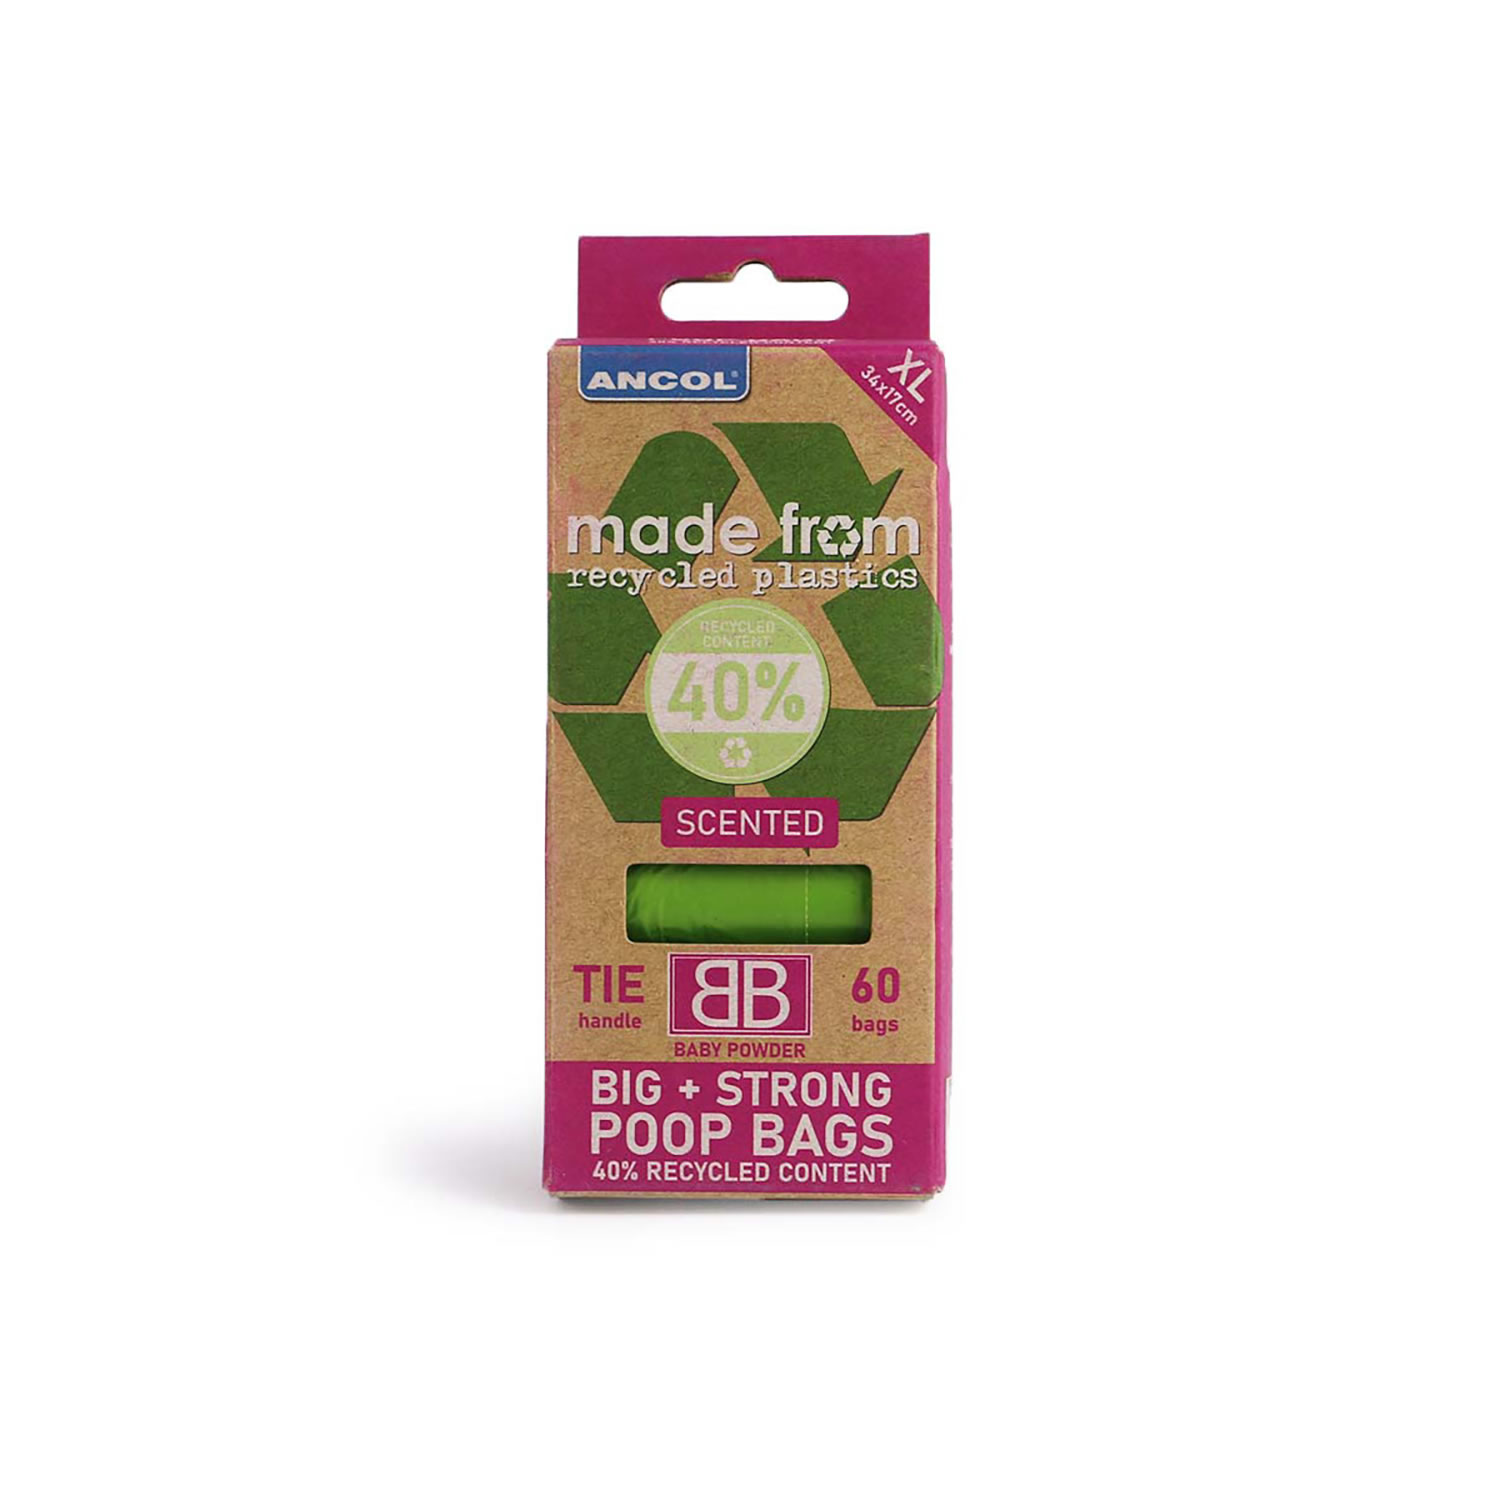 ANCOL MADE FROM - SCENTED POOP BAG REFILL ANCOL MADE FROM - SCENTED POOP BAG REFILL 4 PACK  4 PACK